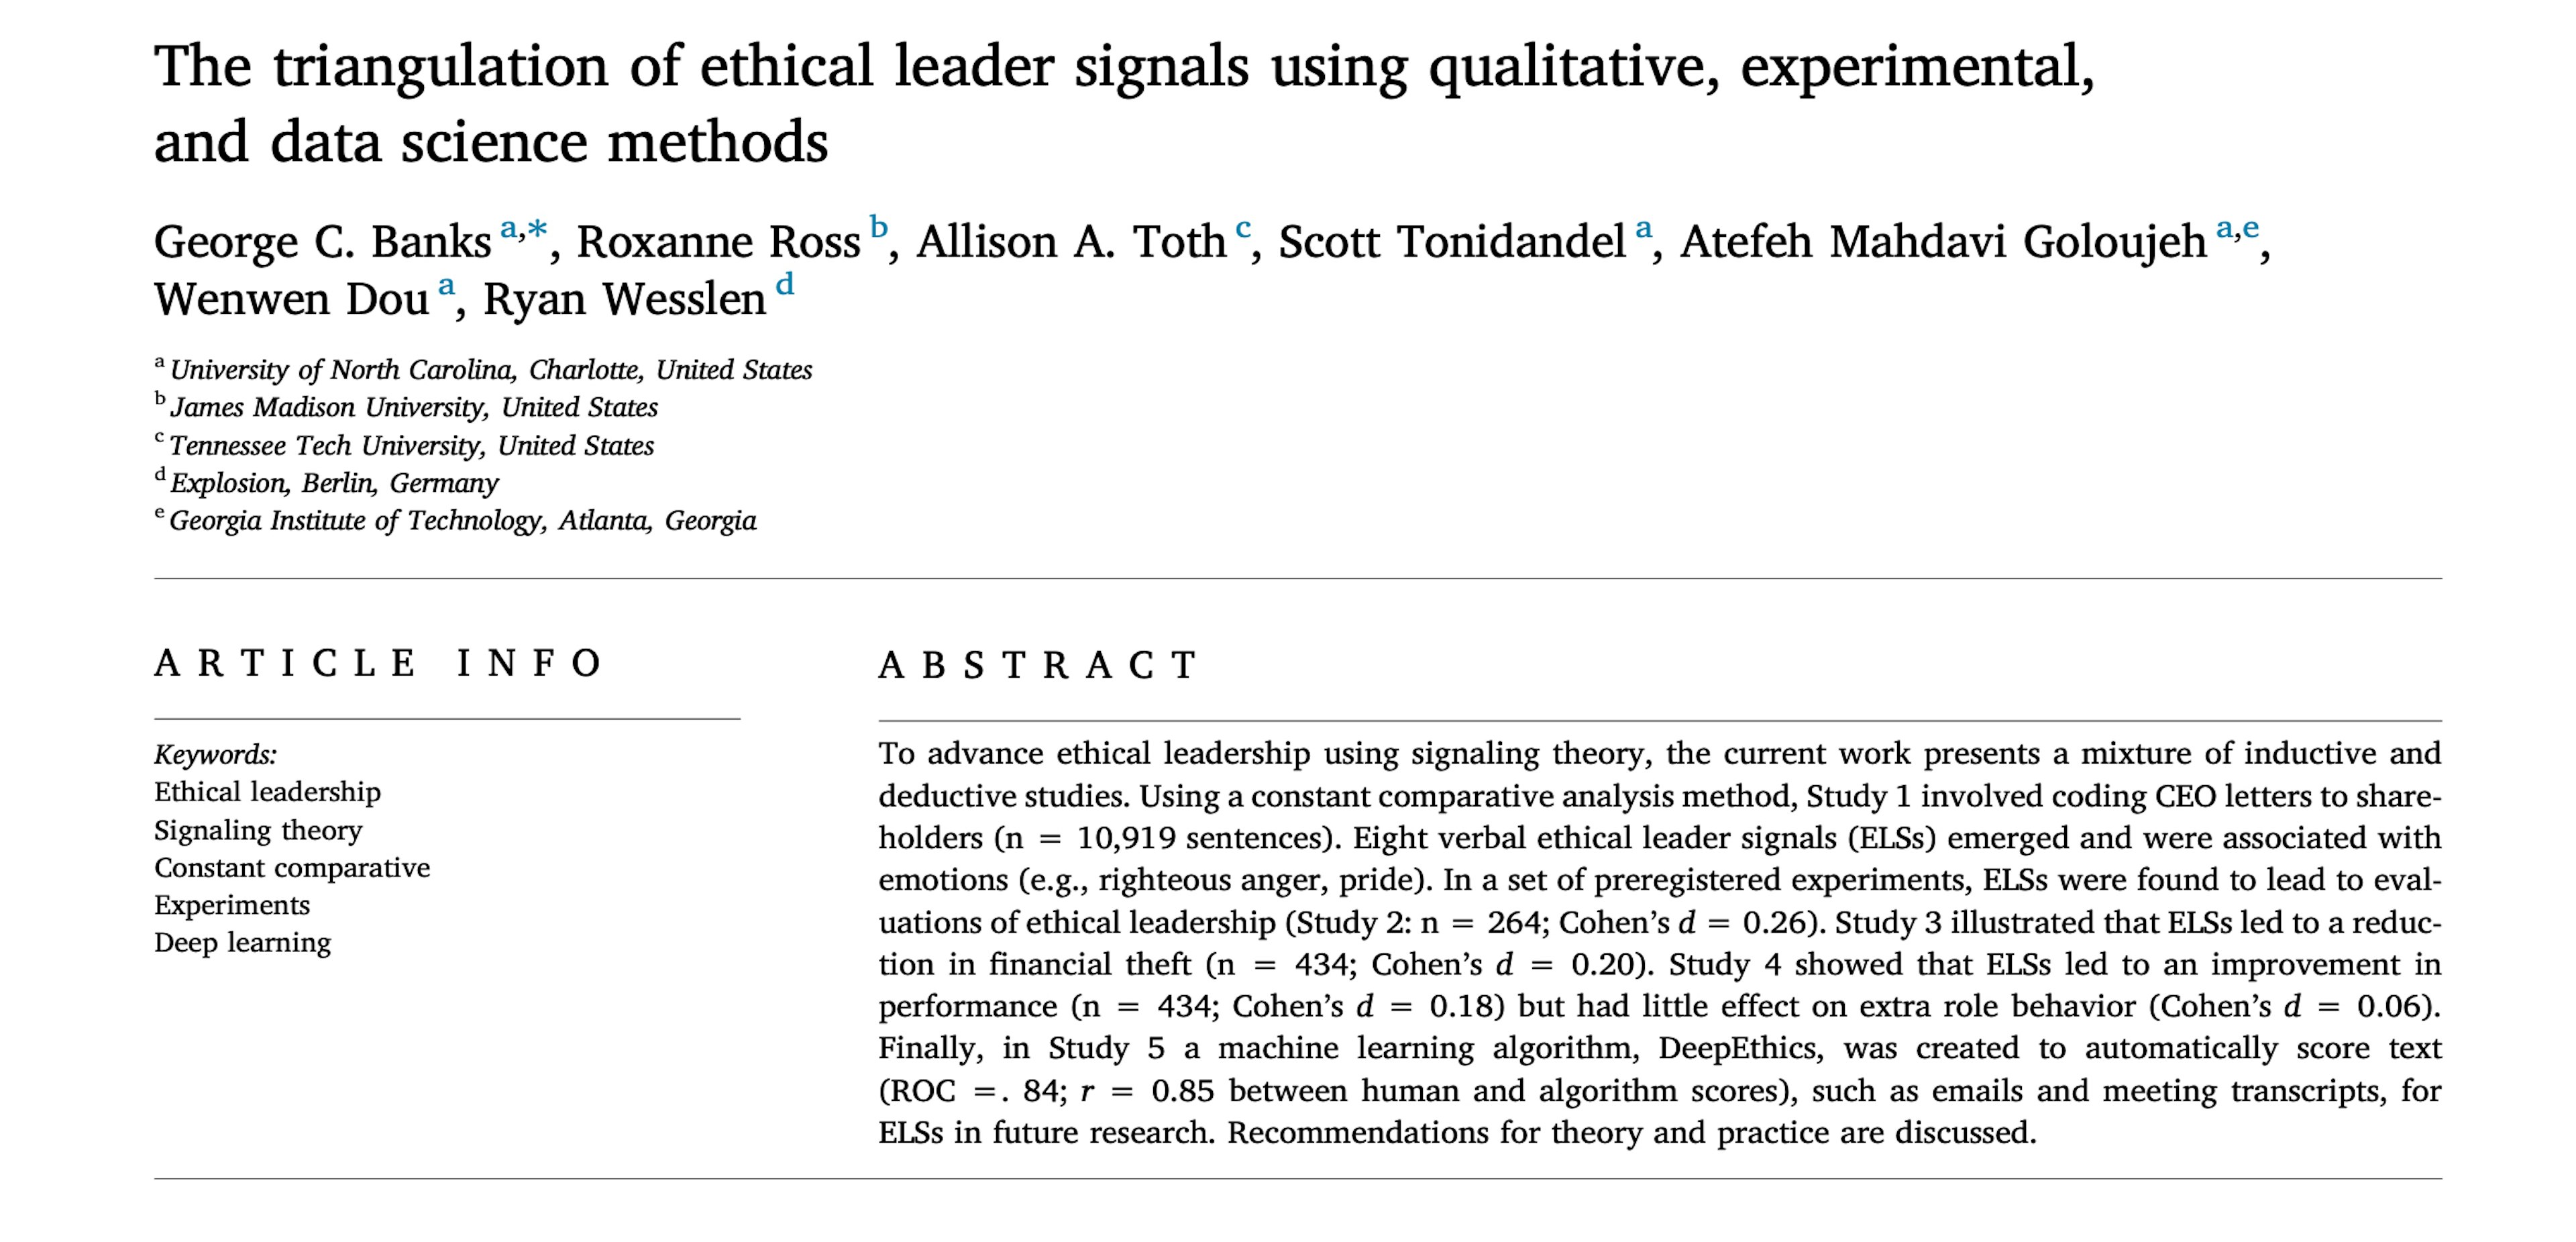 The triangulation of ethical leader signals using qualitative, experimental, and data science methods